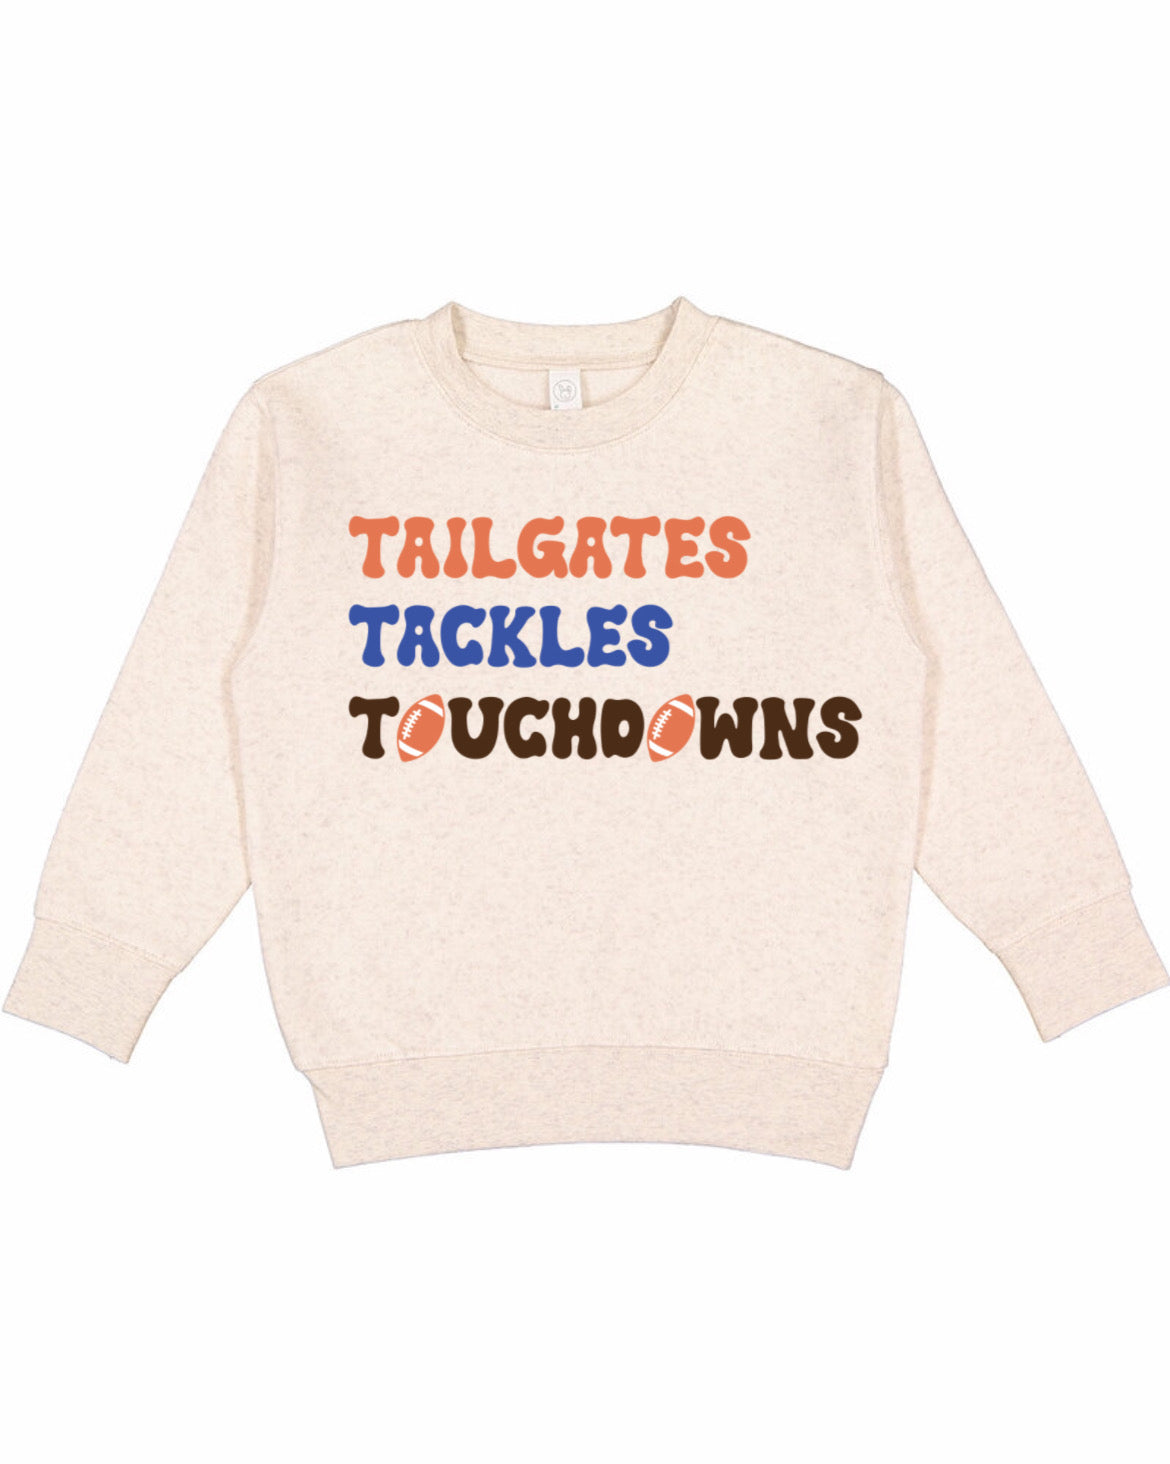 Tailgates tackles touchdowns